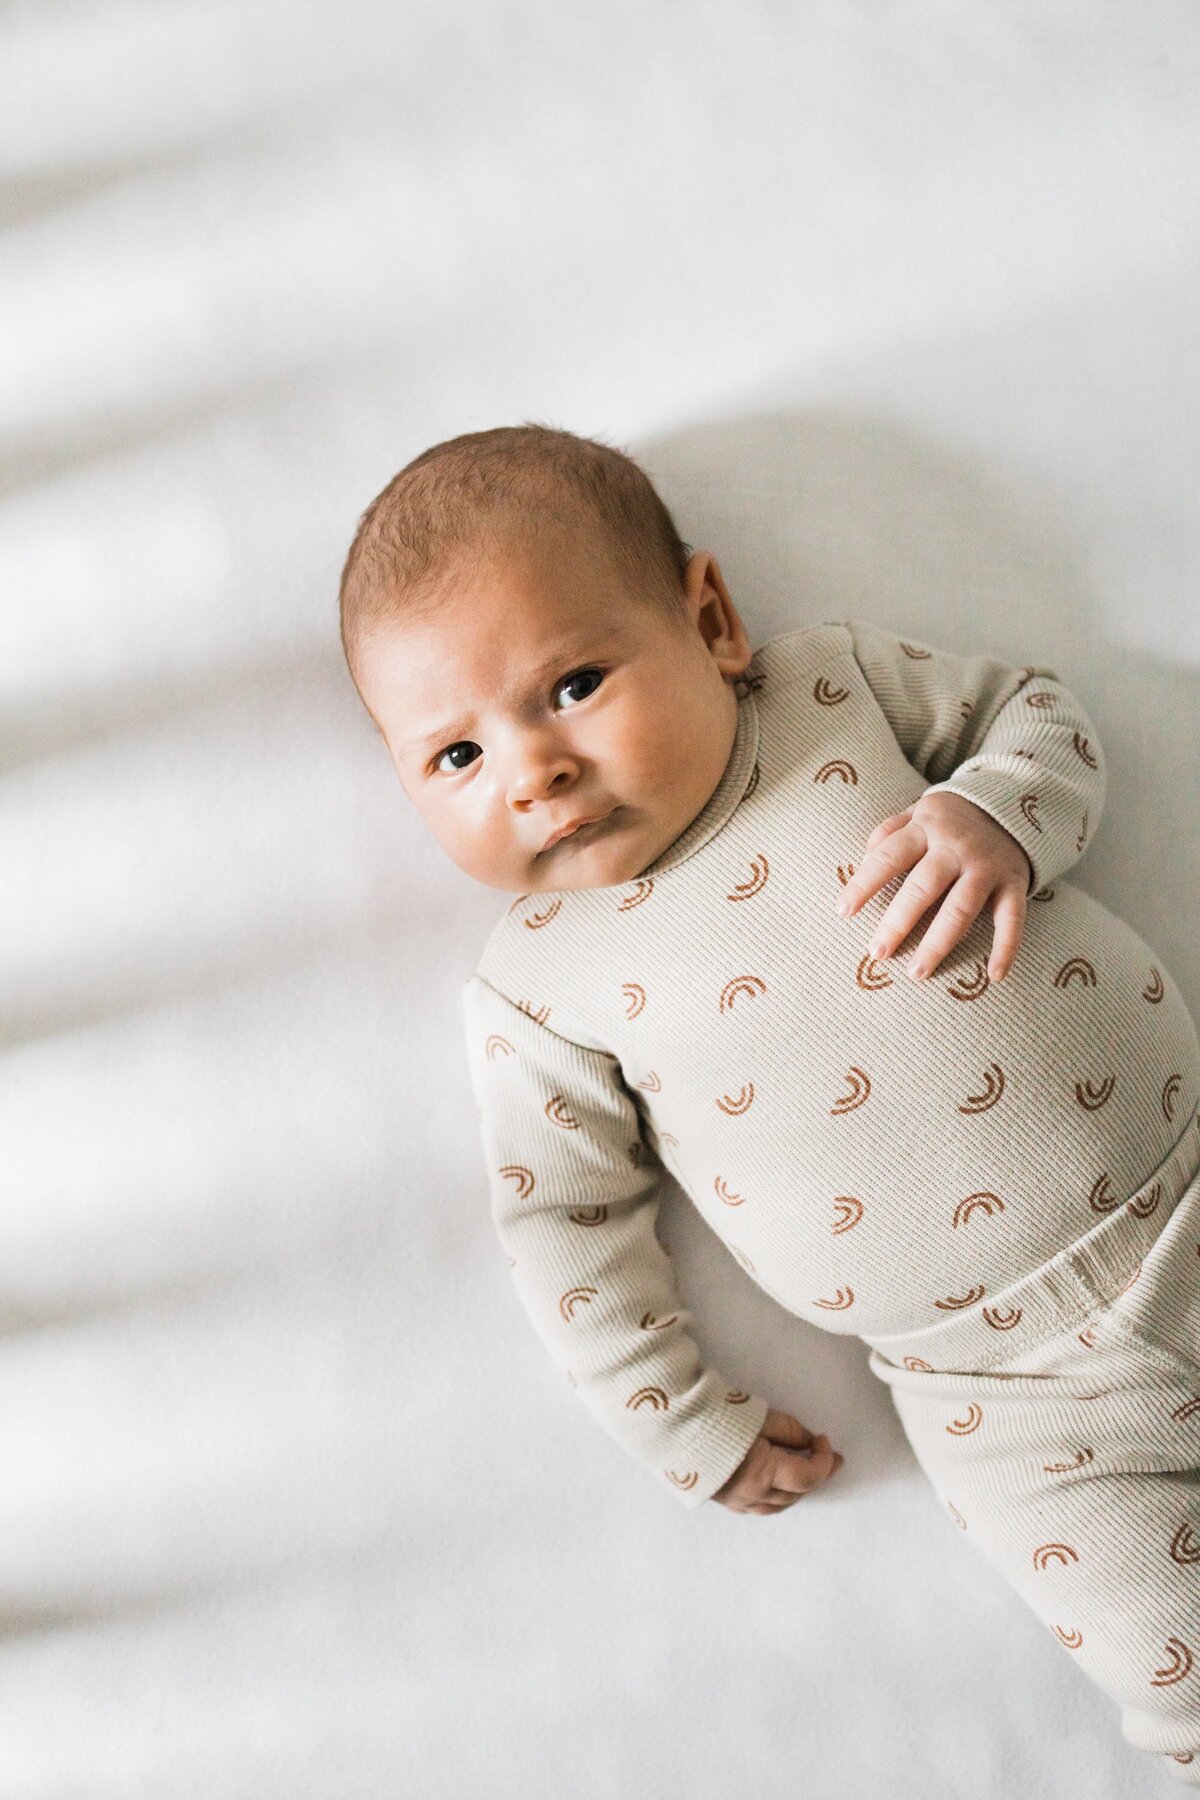 Infant lying on a white blanket wearing a patterned onesie, captured beautifully using DIY newborn photos techniques.